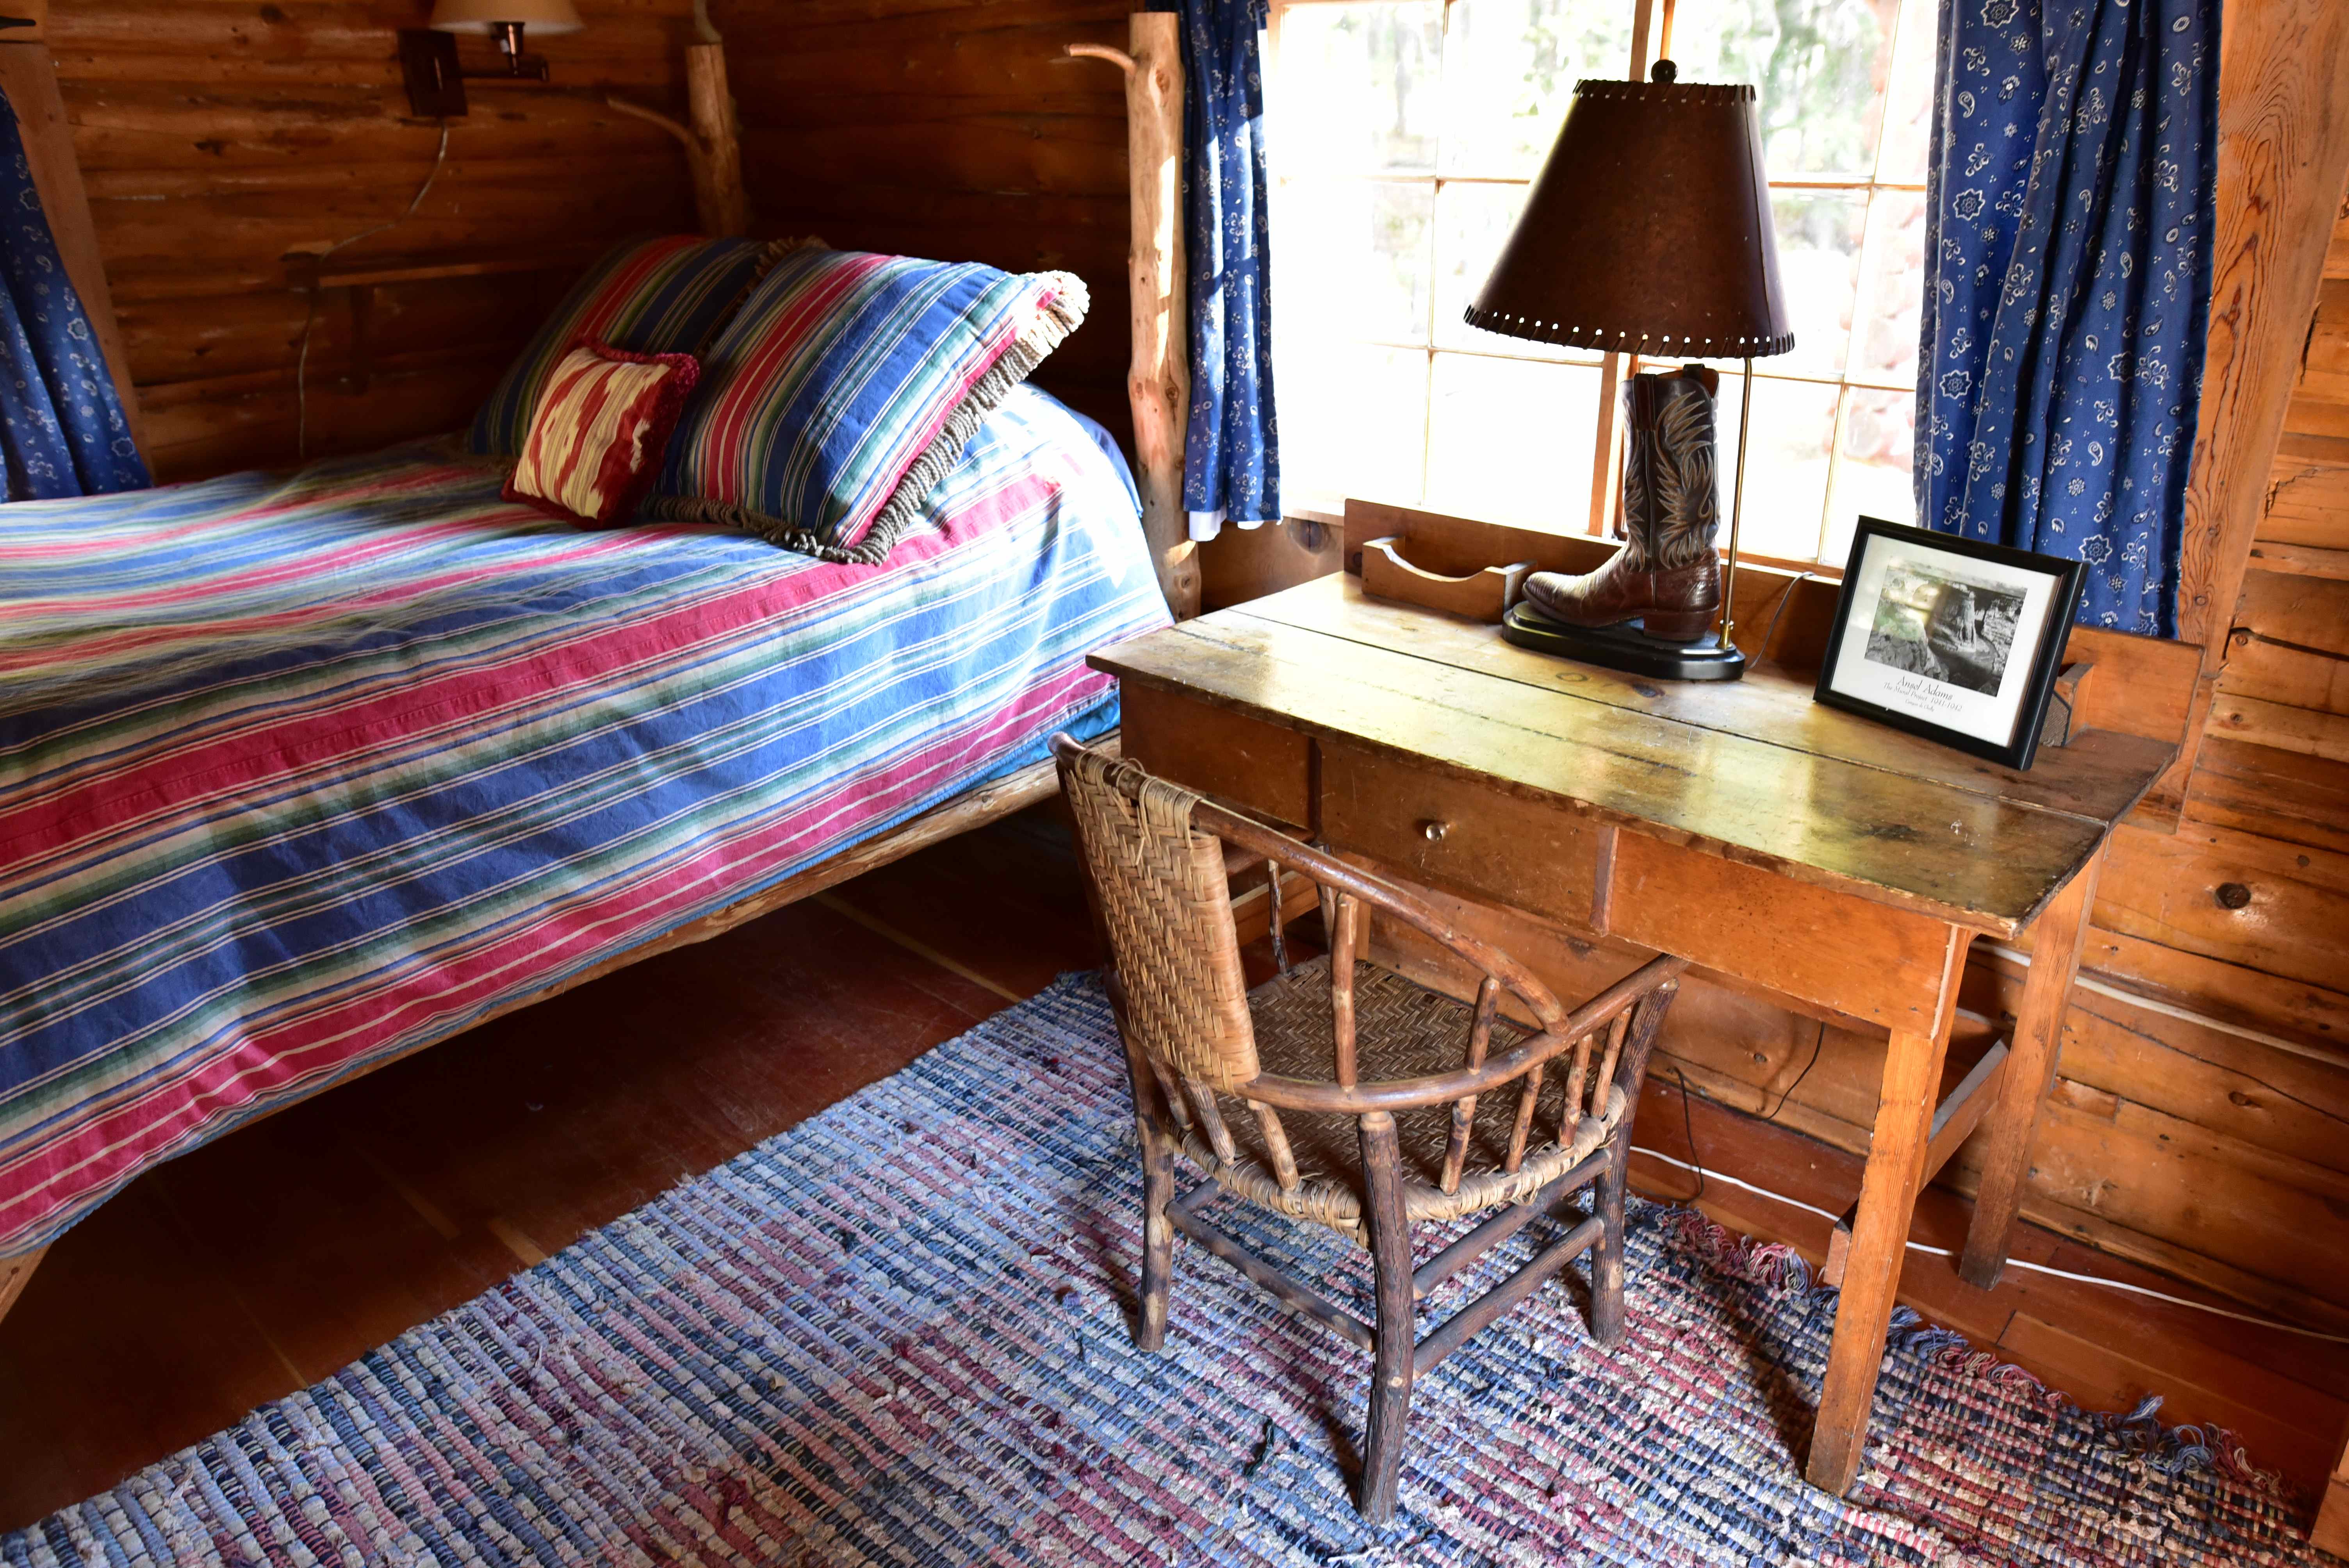 Writers attending the Left Bank Writers Retreat’s U.S. Hemingway’s Wyoming  weekend will see the room at Spear-O-Wigwam where Hemingway worked on A Farewell to Arms (photo by Travis Cebula).